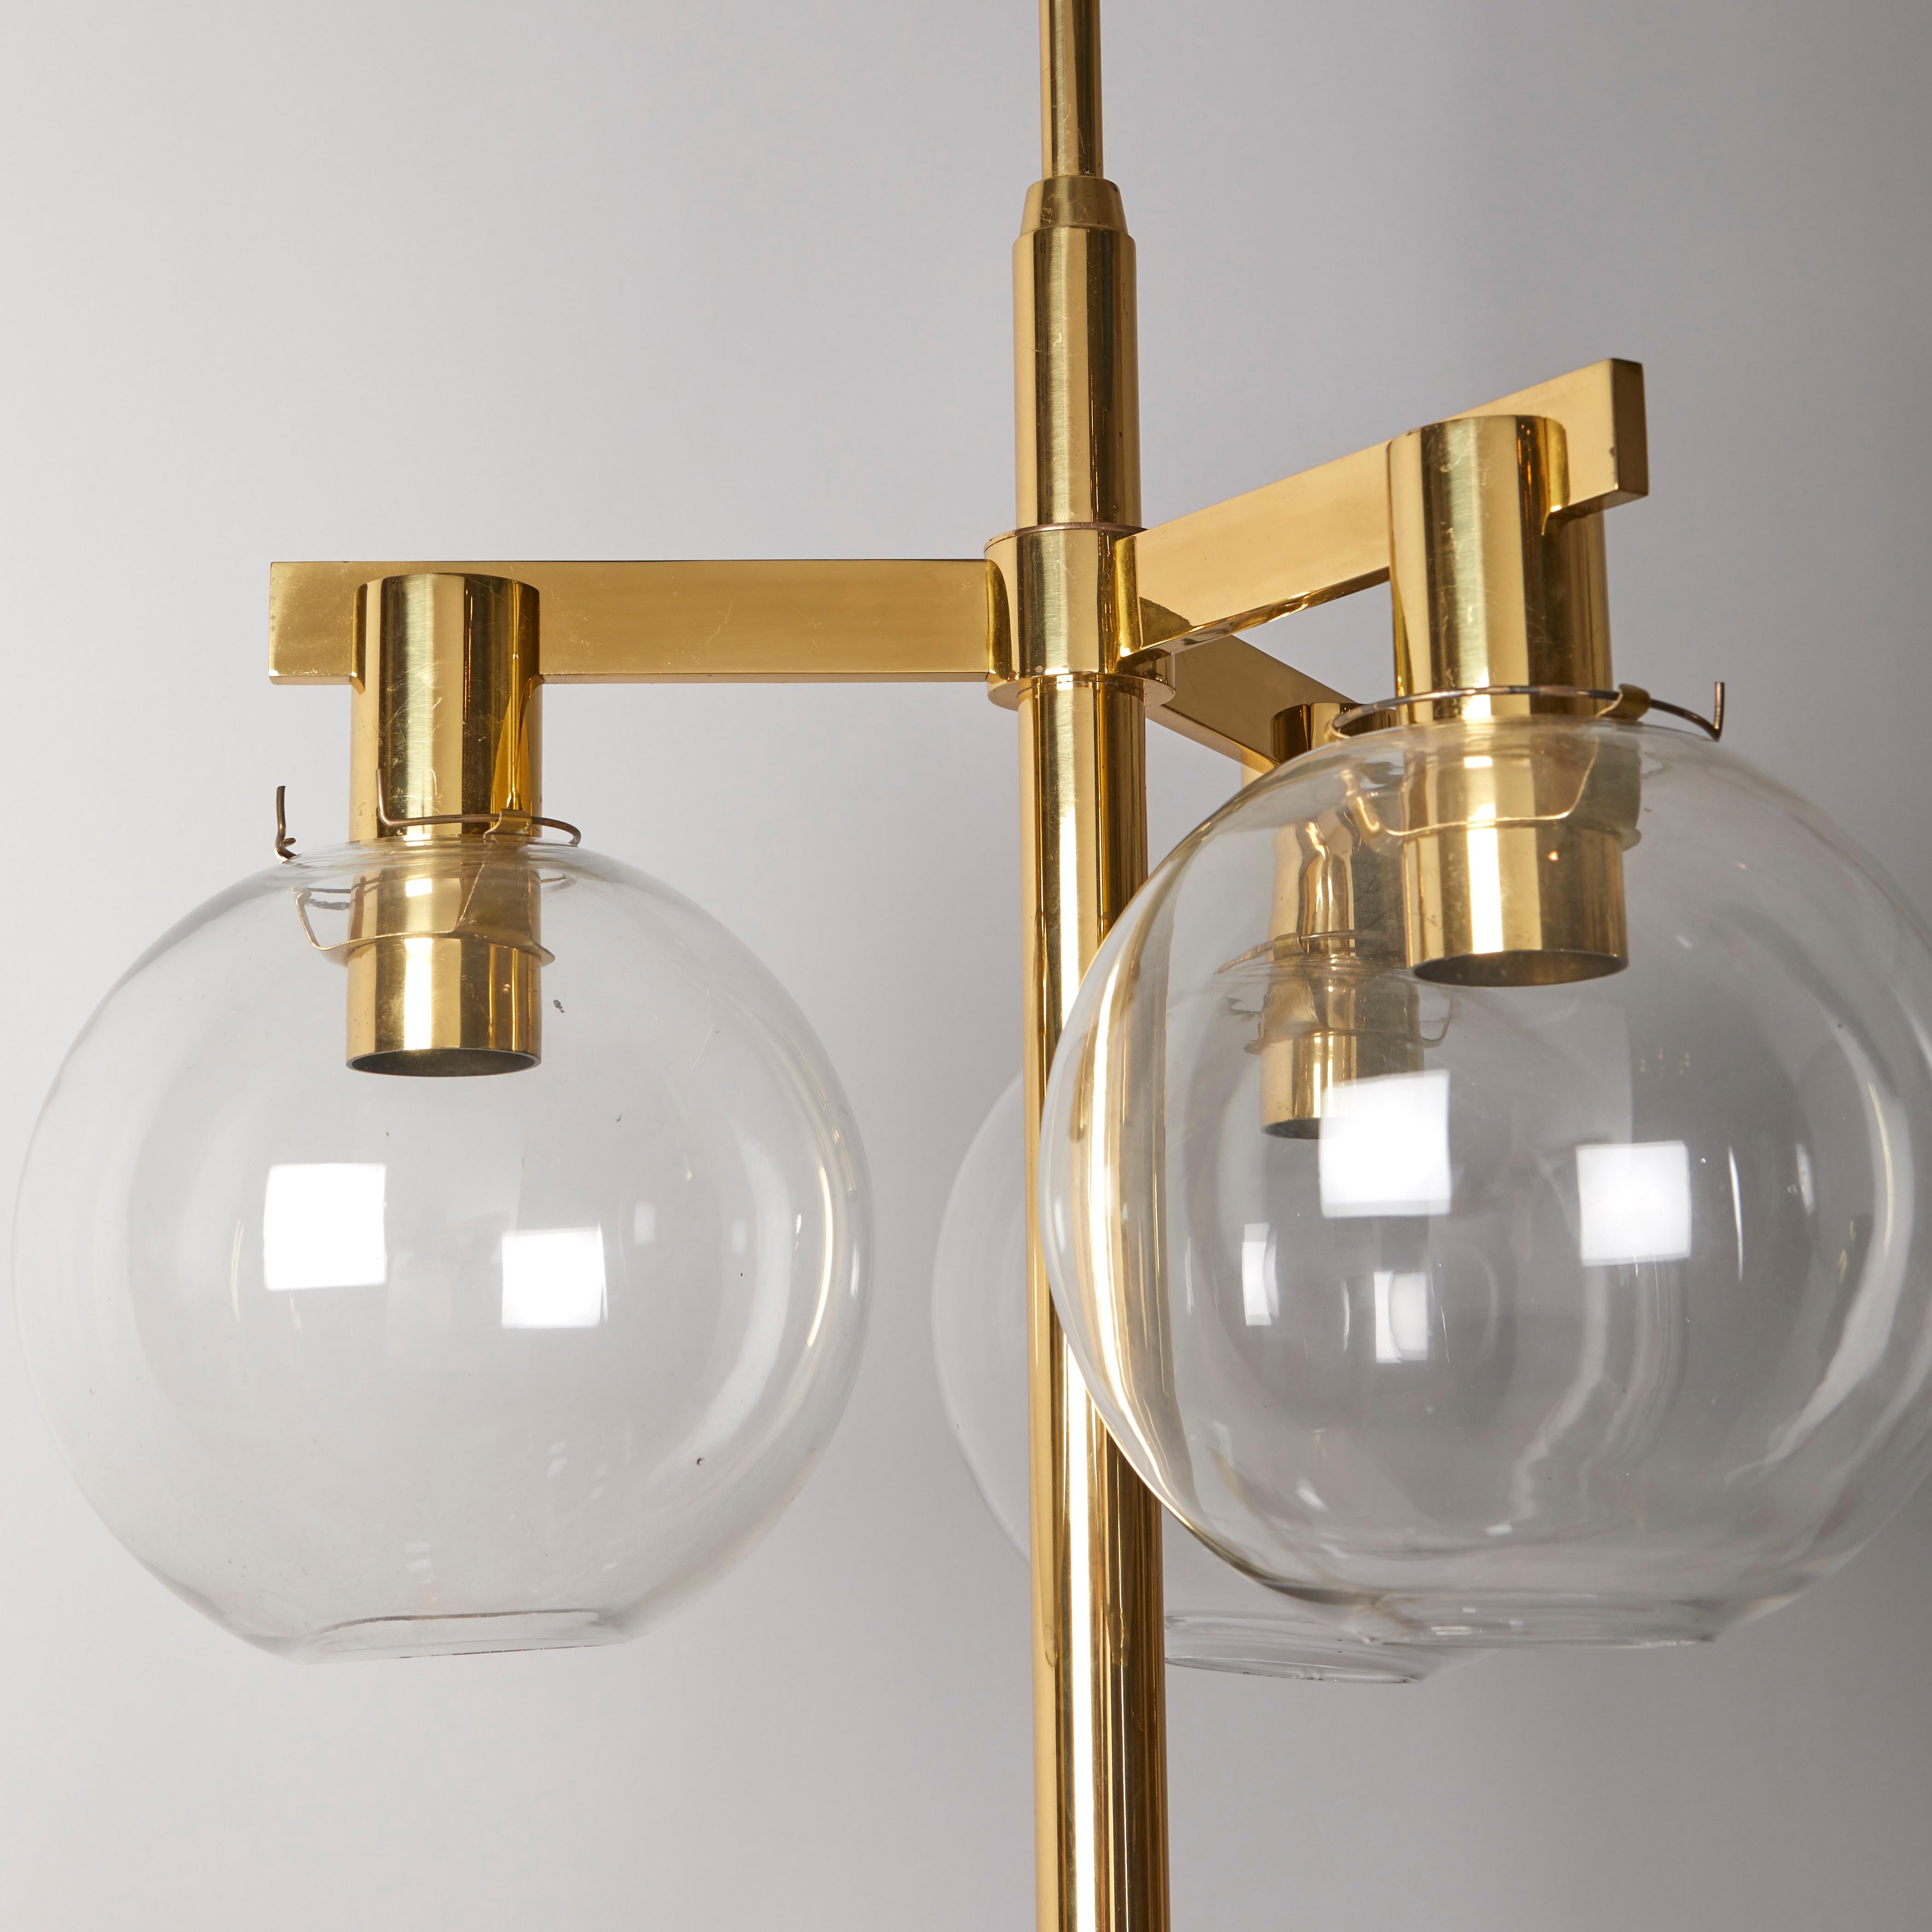 A rare nine-light contemporary design celling fixtures designed by Hans-Agne Jakobsson (1919–2009). The brass frames with light patina and lacquered finish having clear glass globes, each concealing a medium socket. Circa 1970.  Provenance: Rydaholm